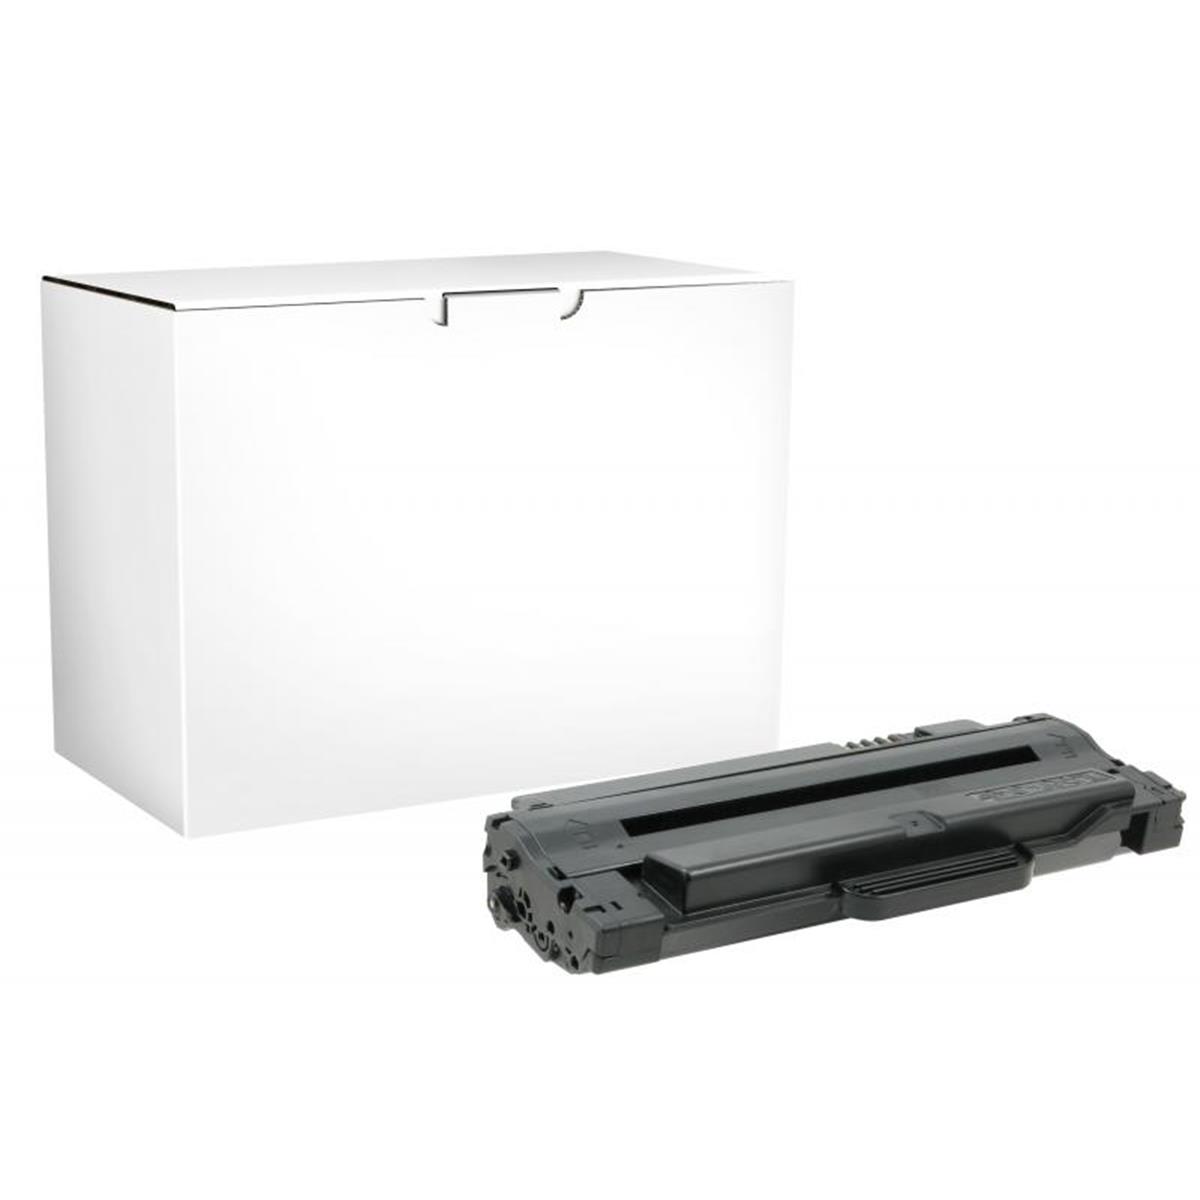 Picture of Dell 200522 High Yield Toner Cartridge for Dell 1130